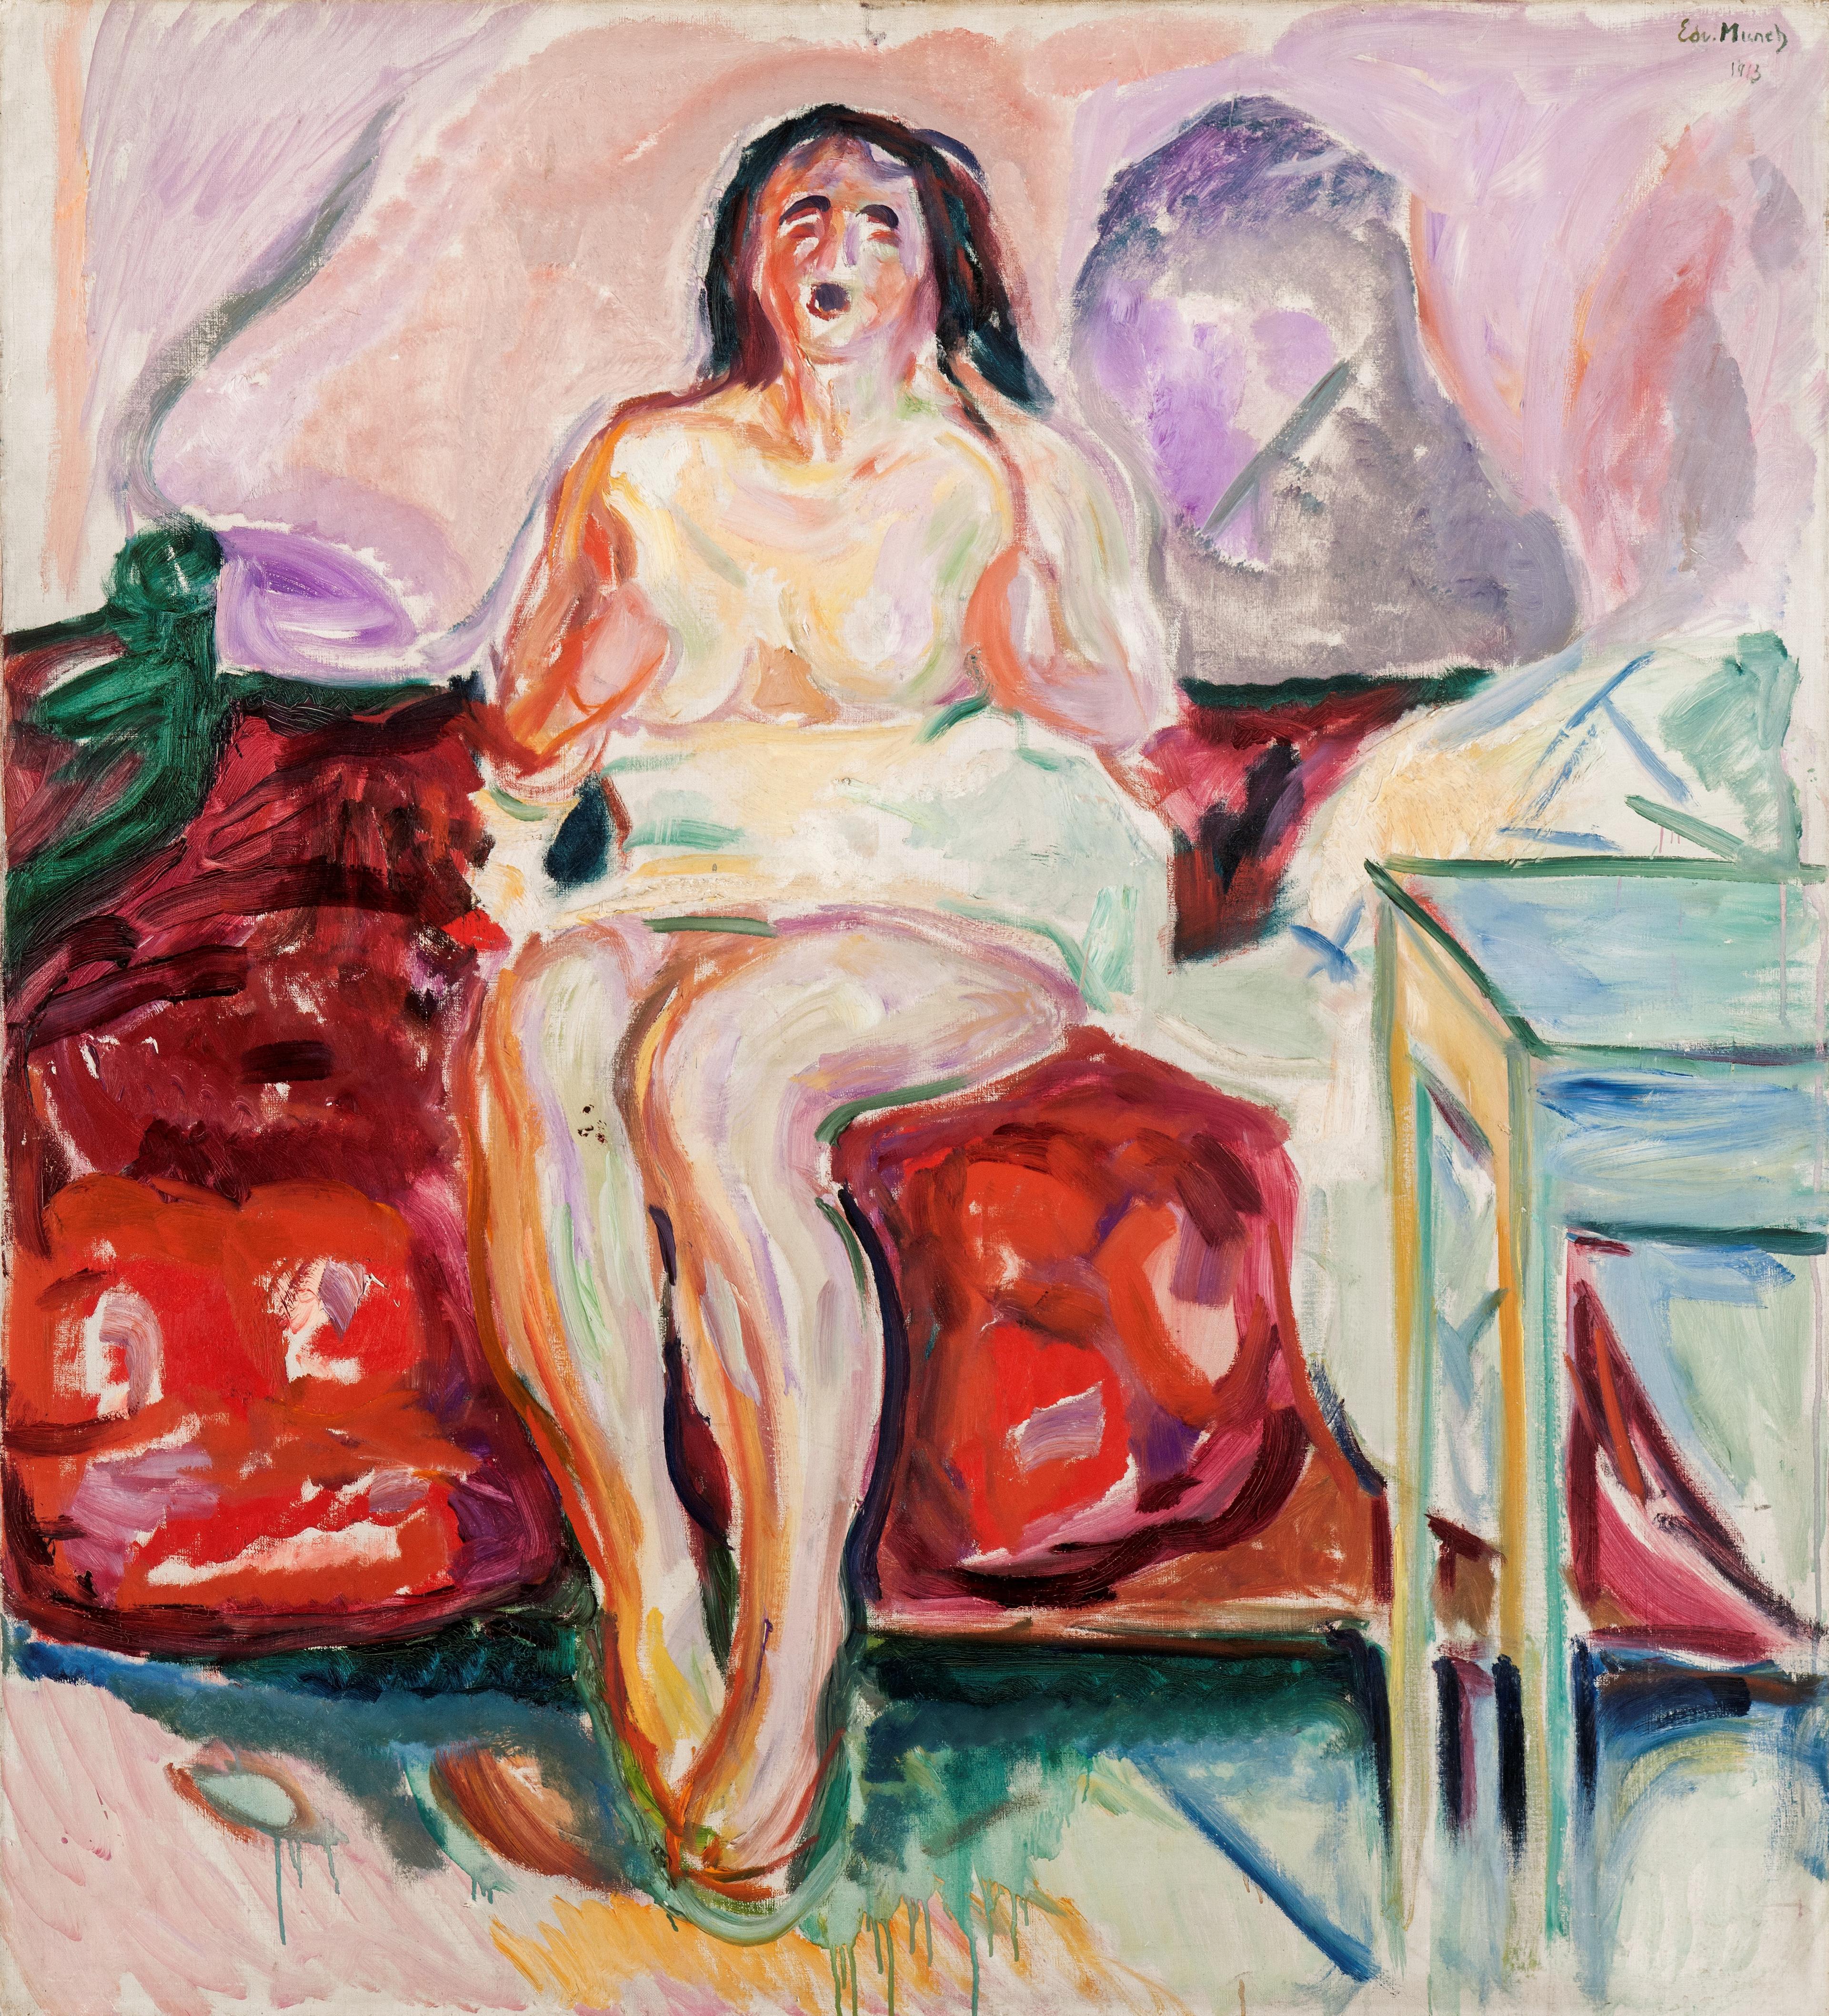 A colorful motif by Edvard Munch. A woman is sitting on a bed, yawning.